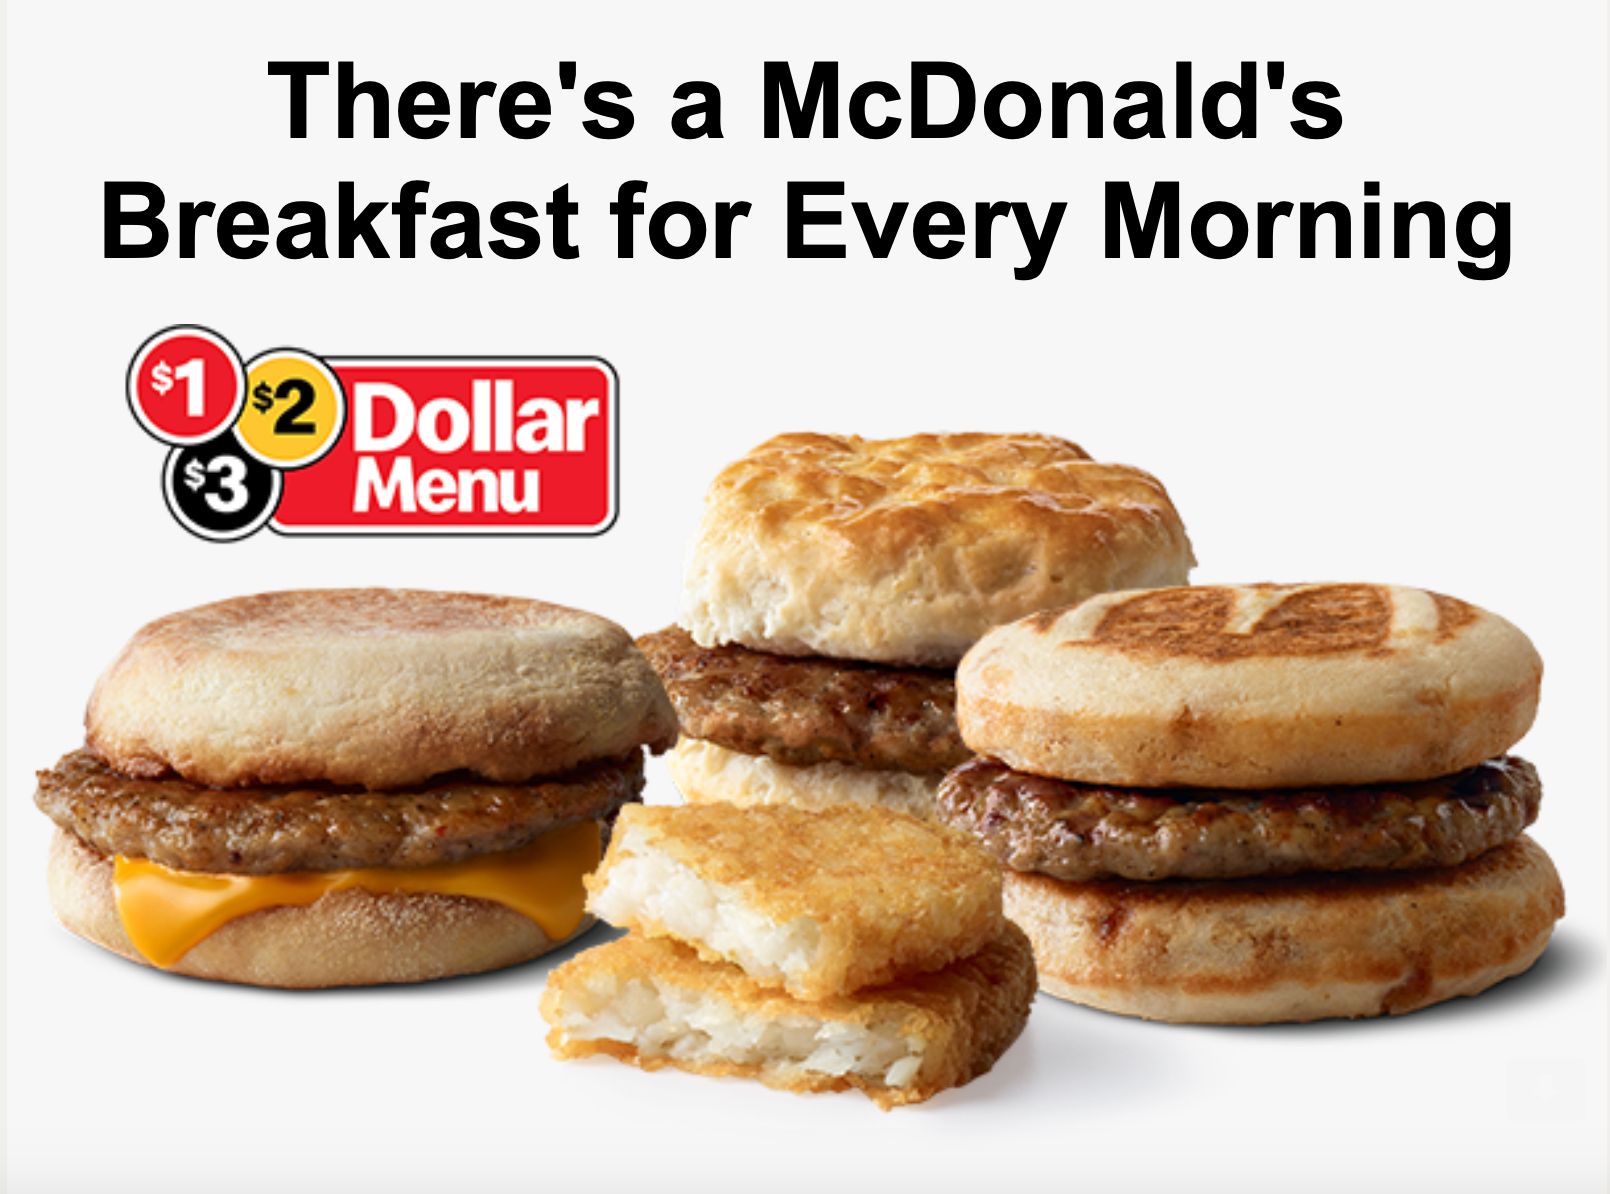 Save on Breakfast with the 1 2 3 Dollar Menu at McDonald's